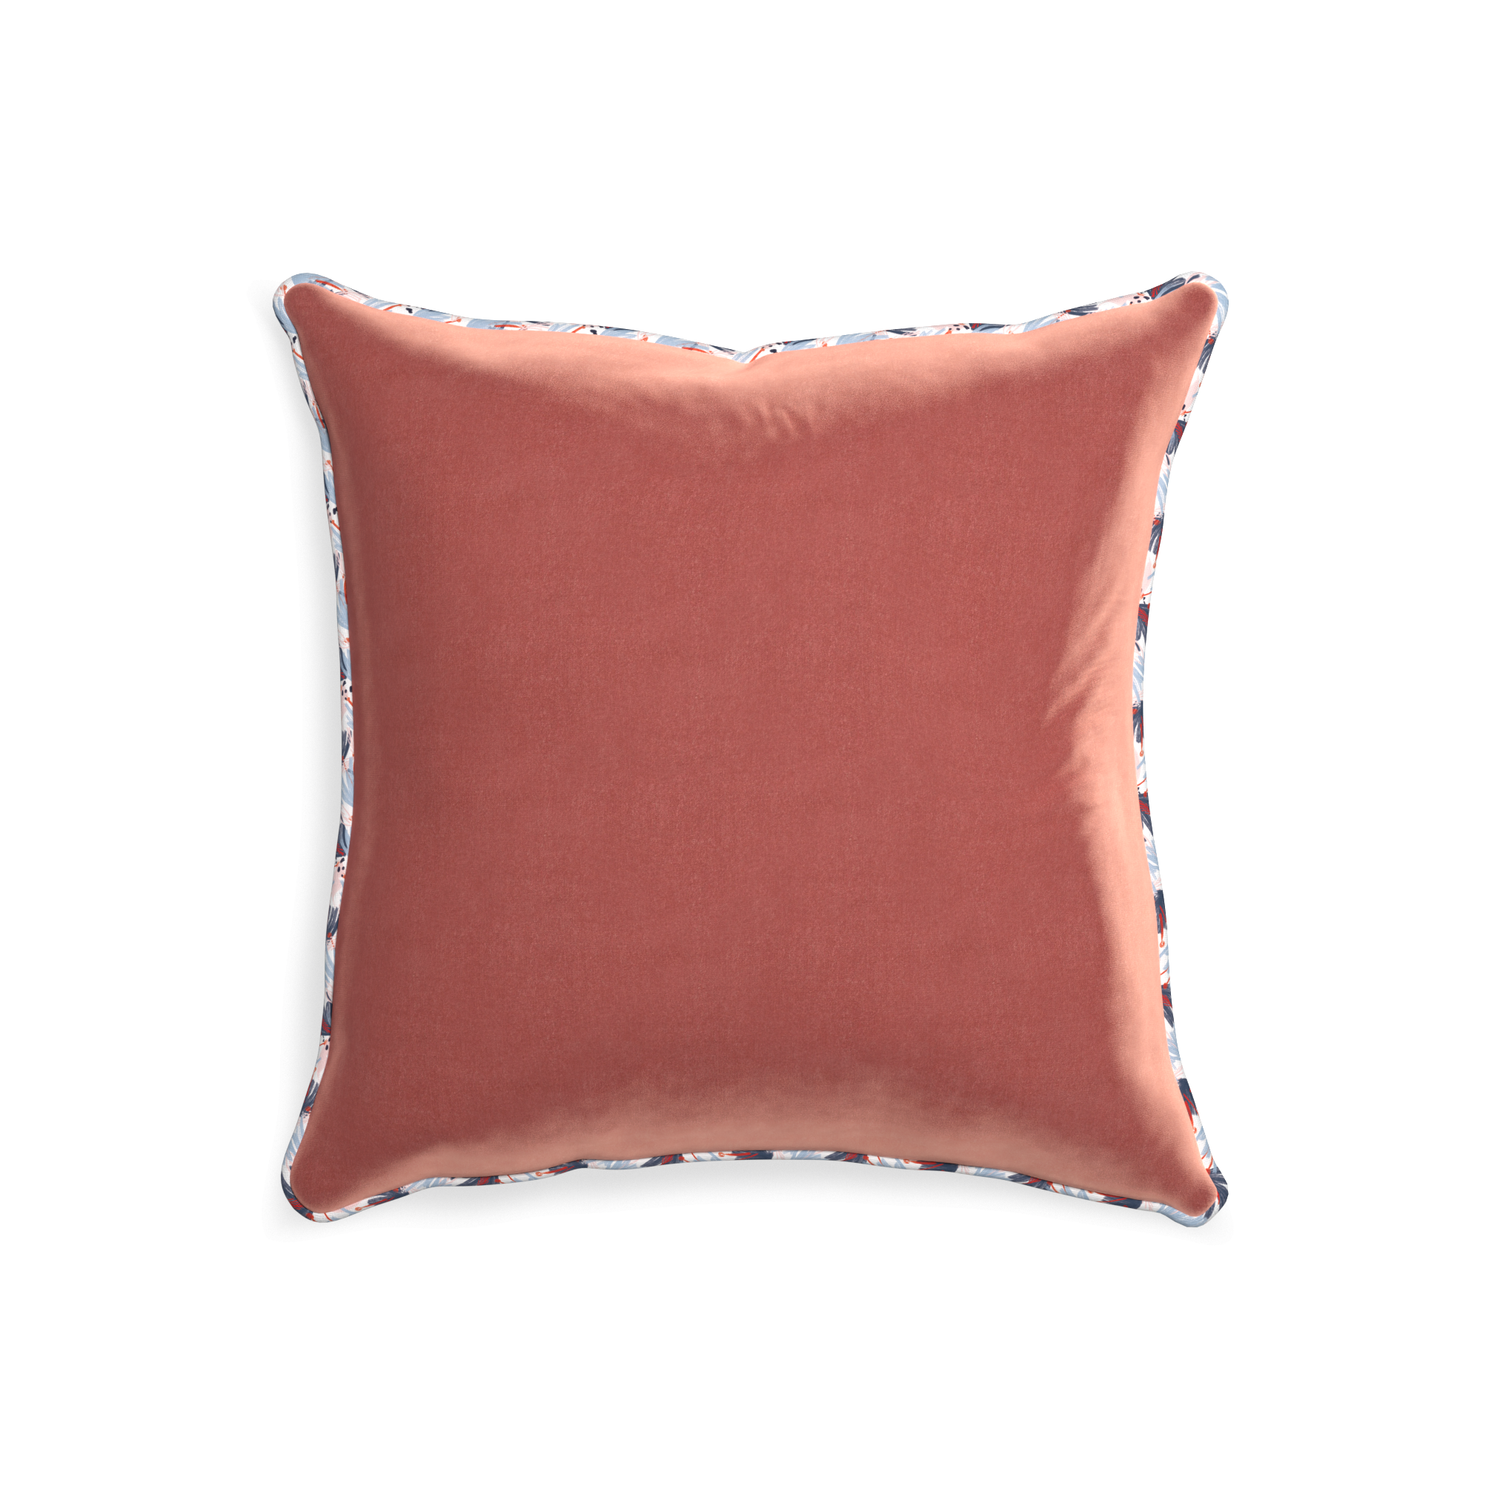 20-square cosmo velvet custom coralpillow with e piping on white background